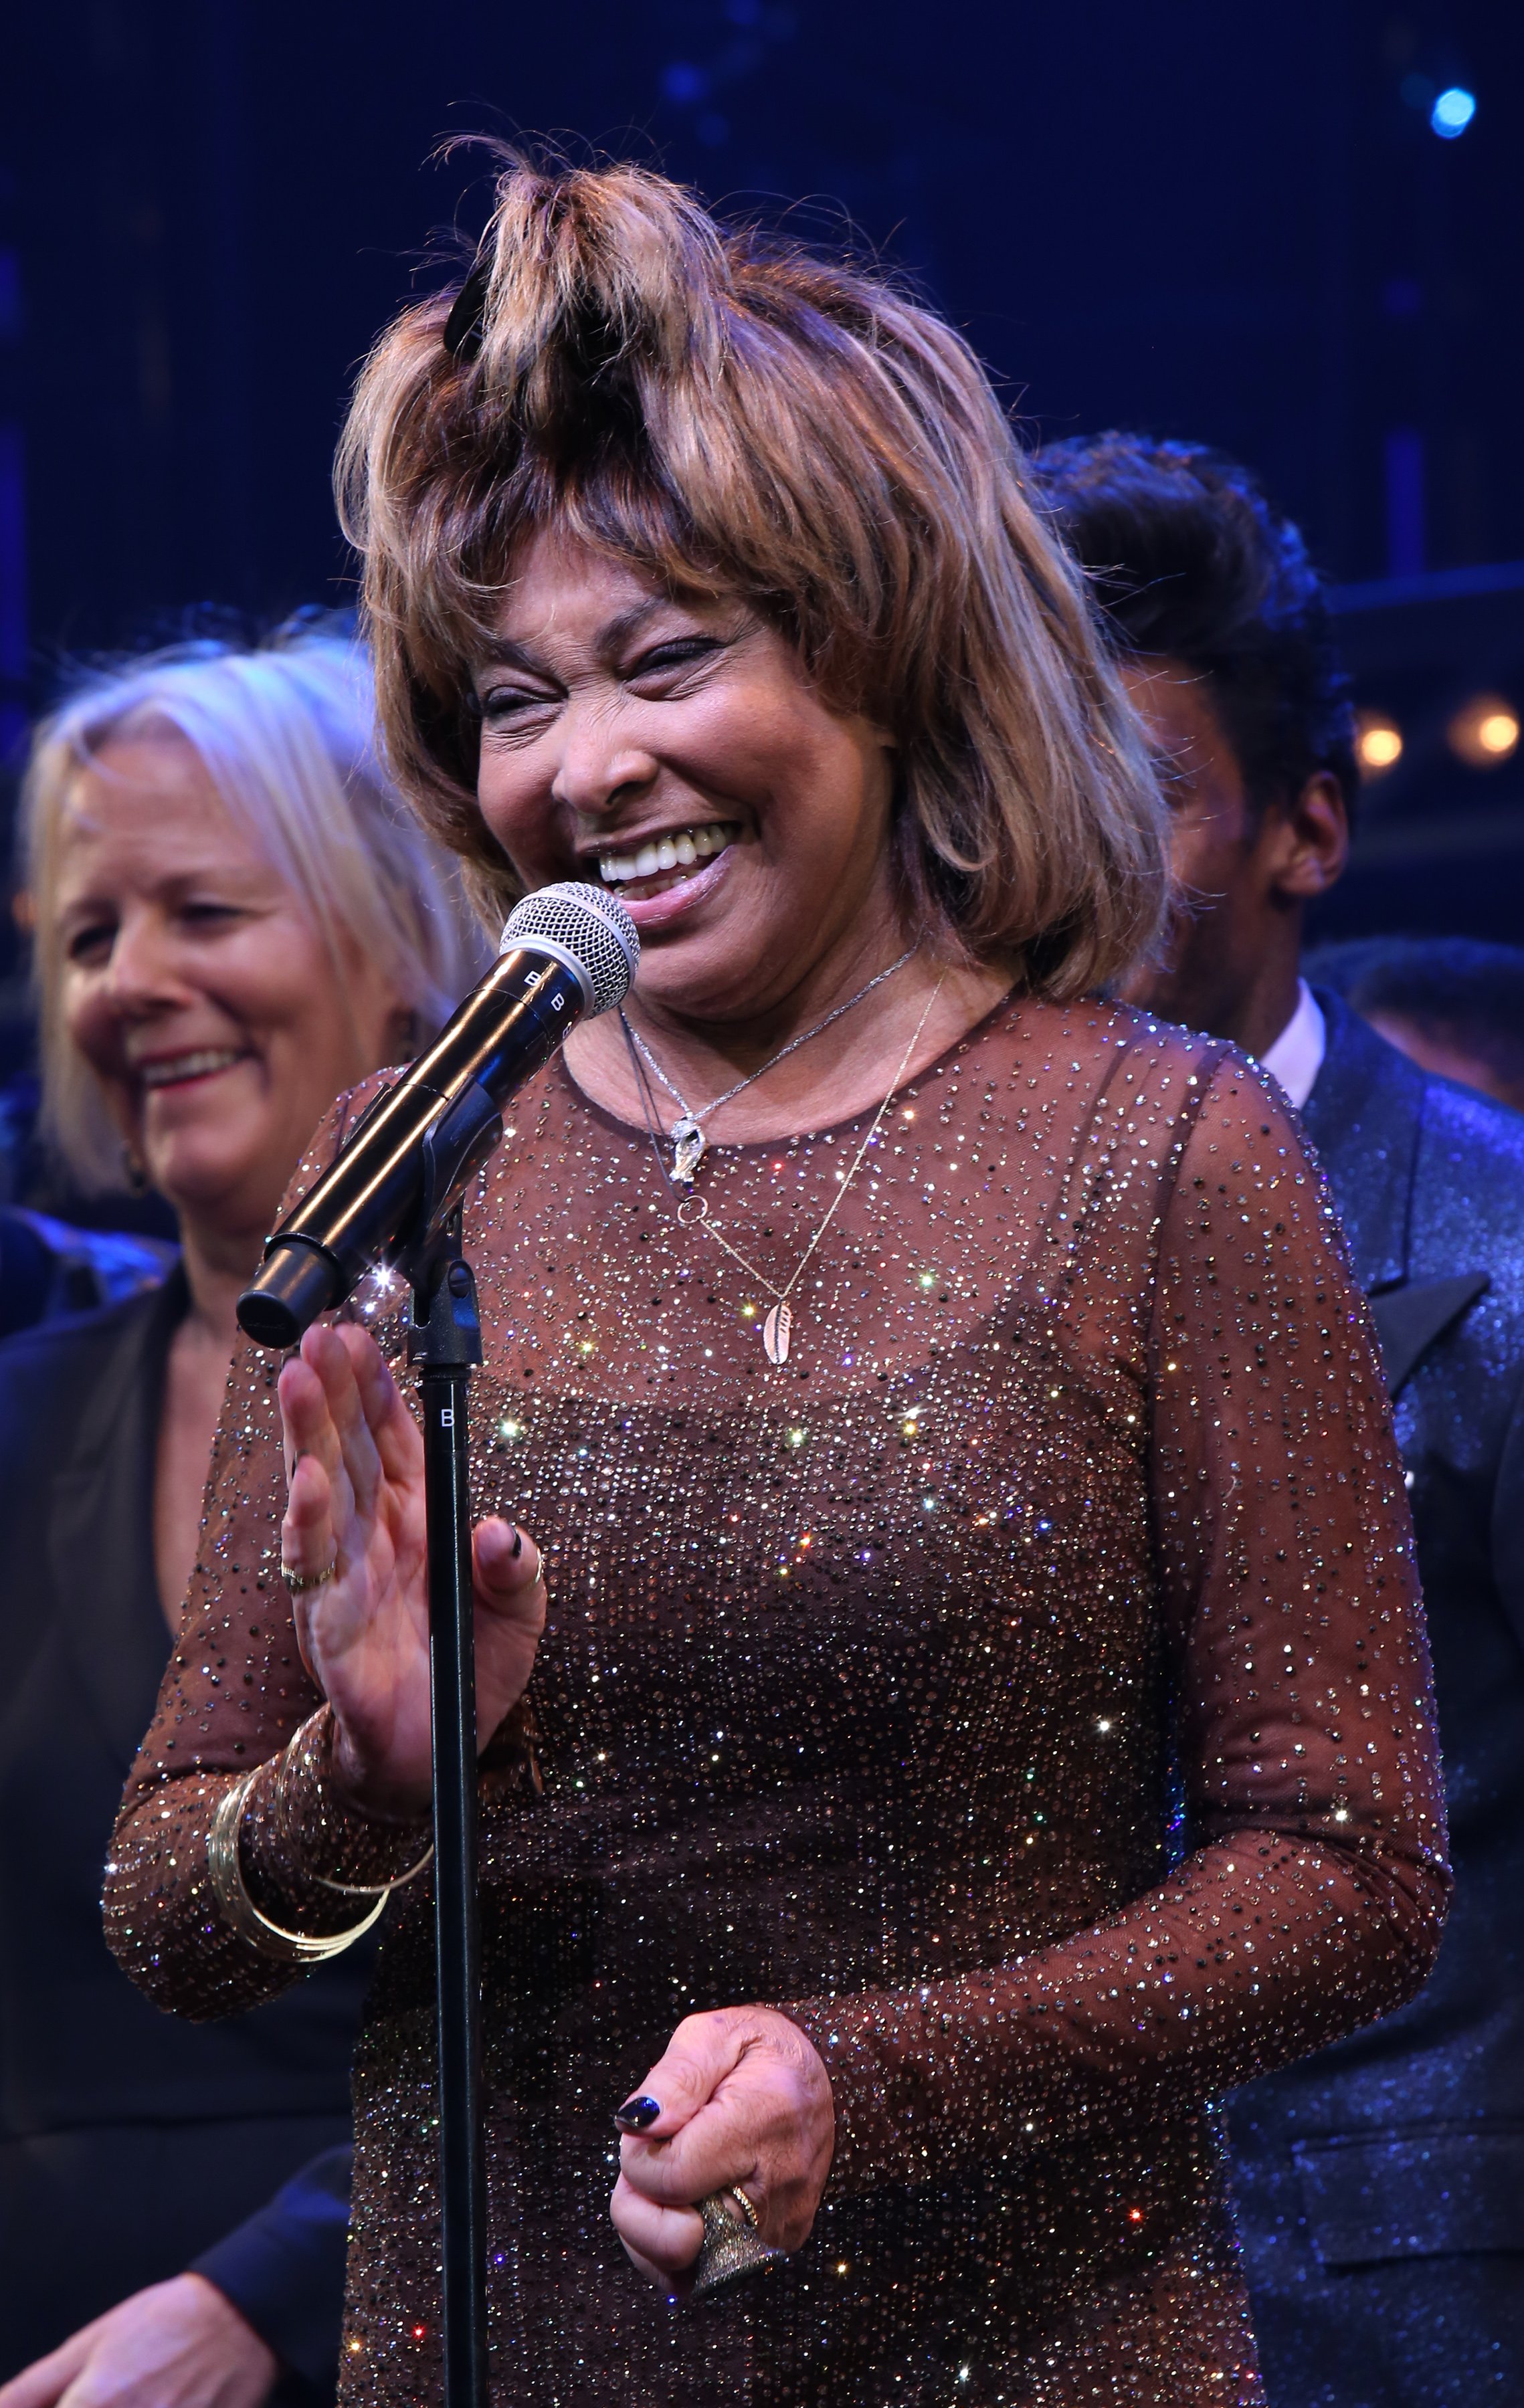 Tina Turner during the "Tina - The Tina Turner Musical" Opening Night Curtain Call at the Lunt-Fontanne Theatre on November 07, 2019, in New York City. | Source: Getty Images